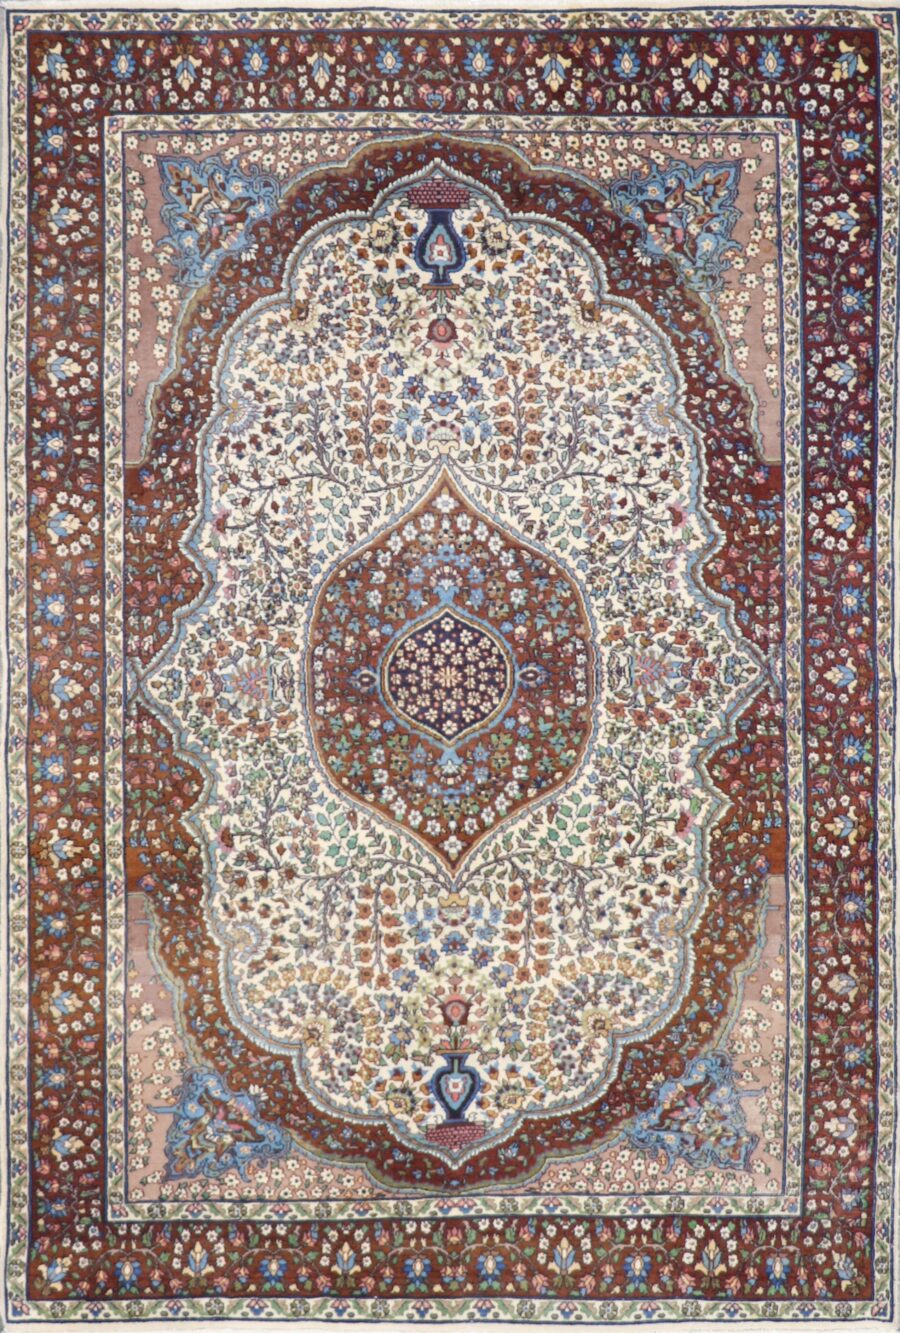 4'7"x7' Traditional Isfahan Persian Design Brown Wool Hand-Knotted Rug - Direct Rug Import | Rugs in Chicago, Indiana,South Bend,Granger